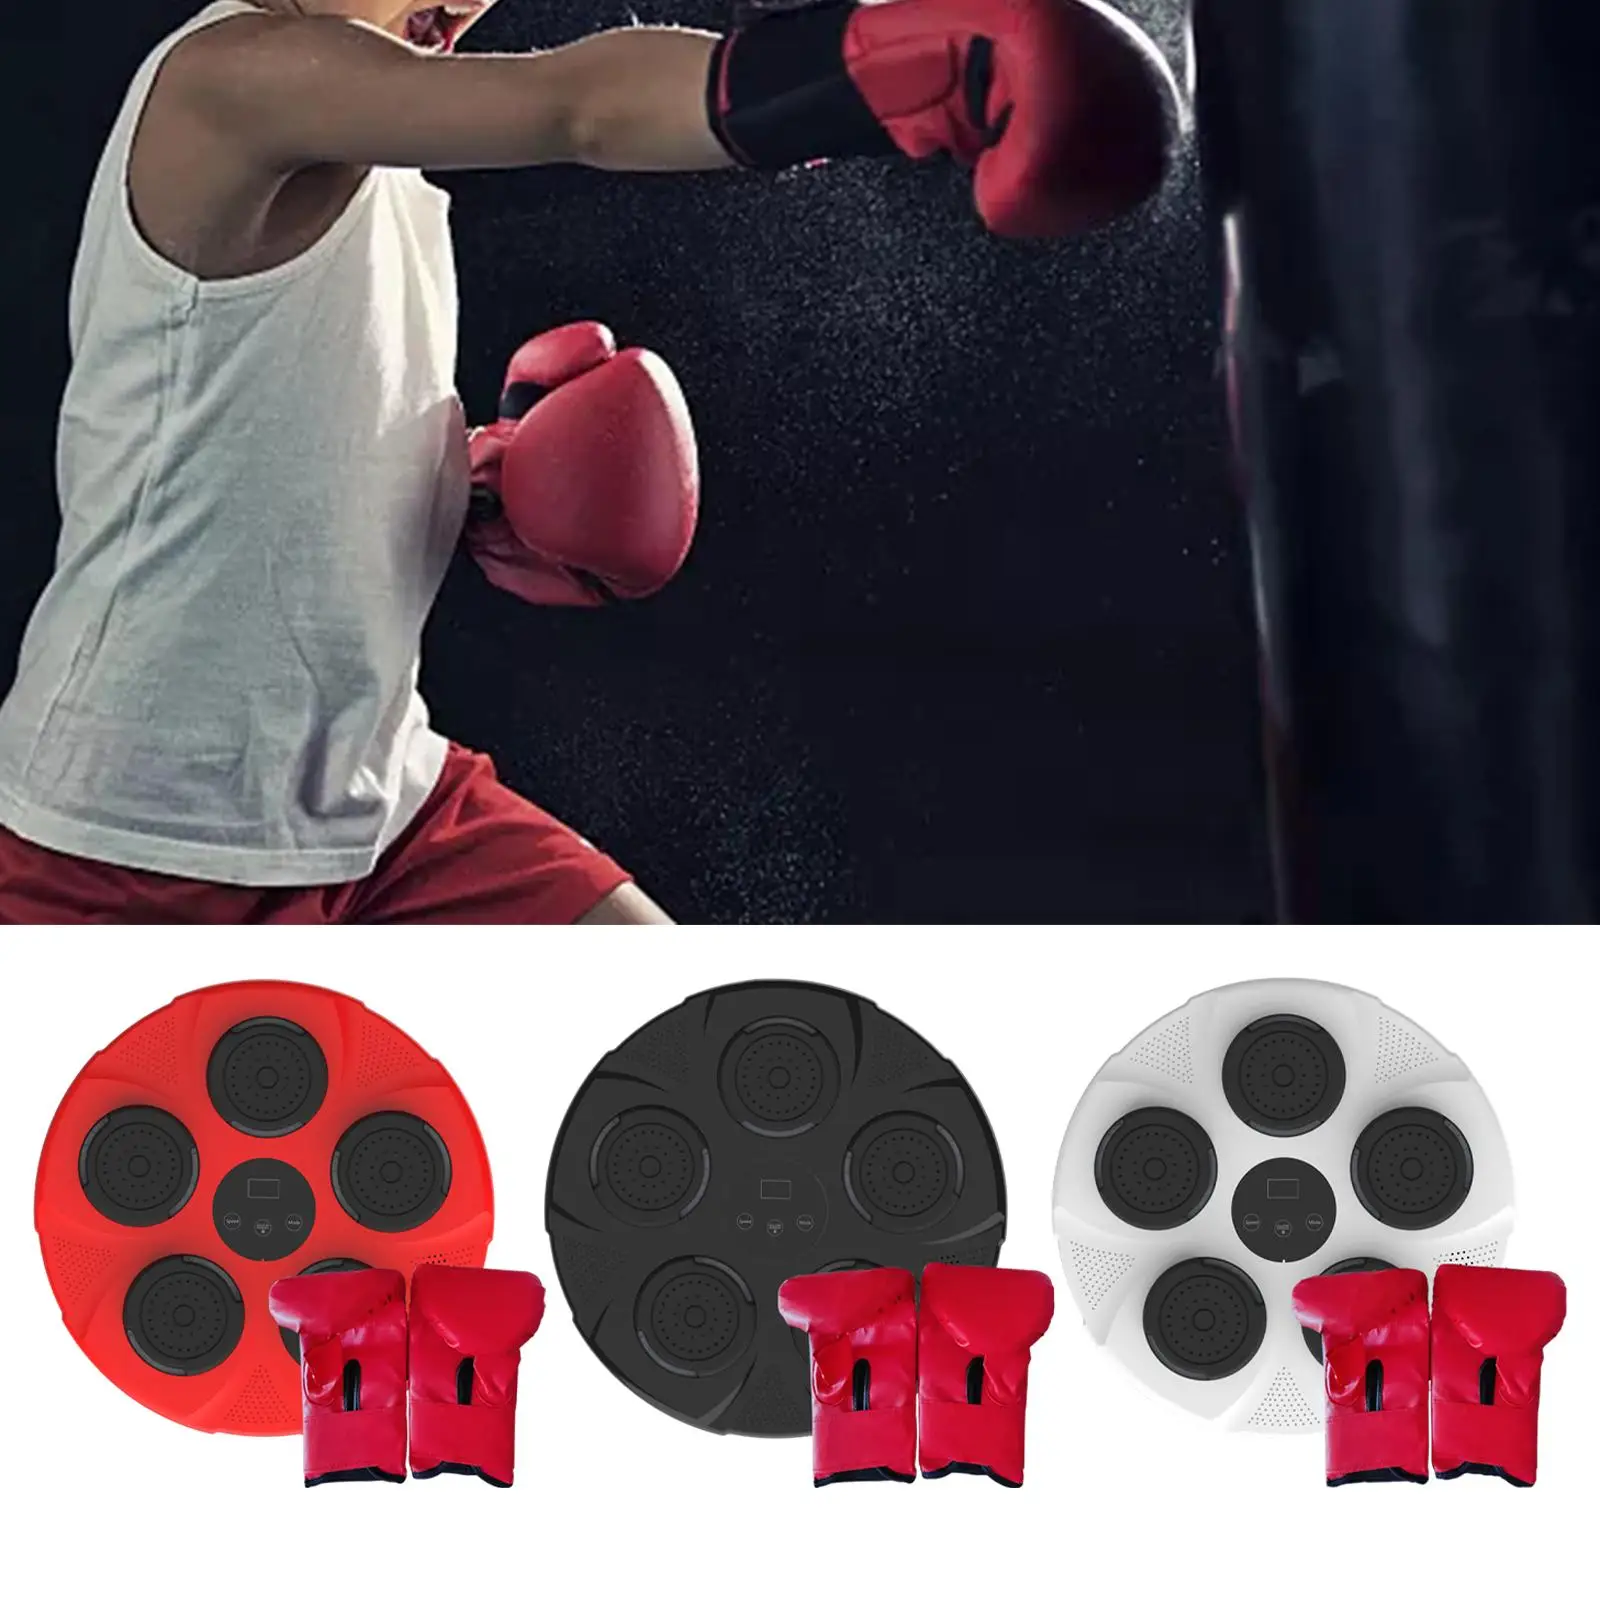 Boxing Machine Smart Boxing Trainer, Adults Adjustable Electronic Boxing Wall Target, Punching Pad for Karate Home Gym Sports